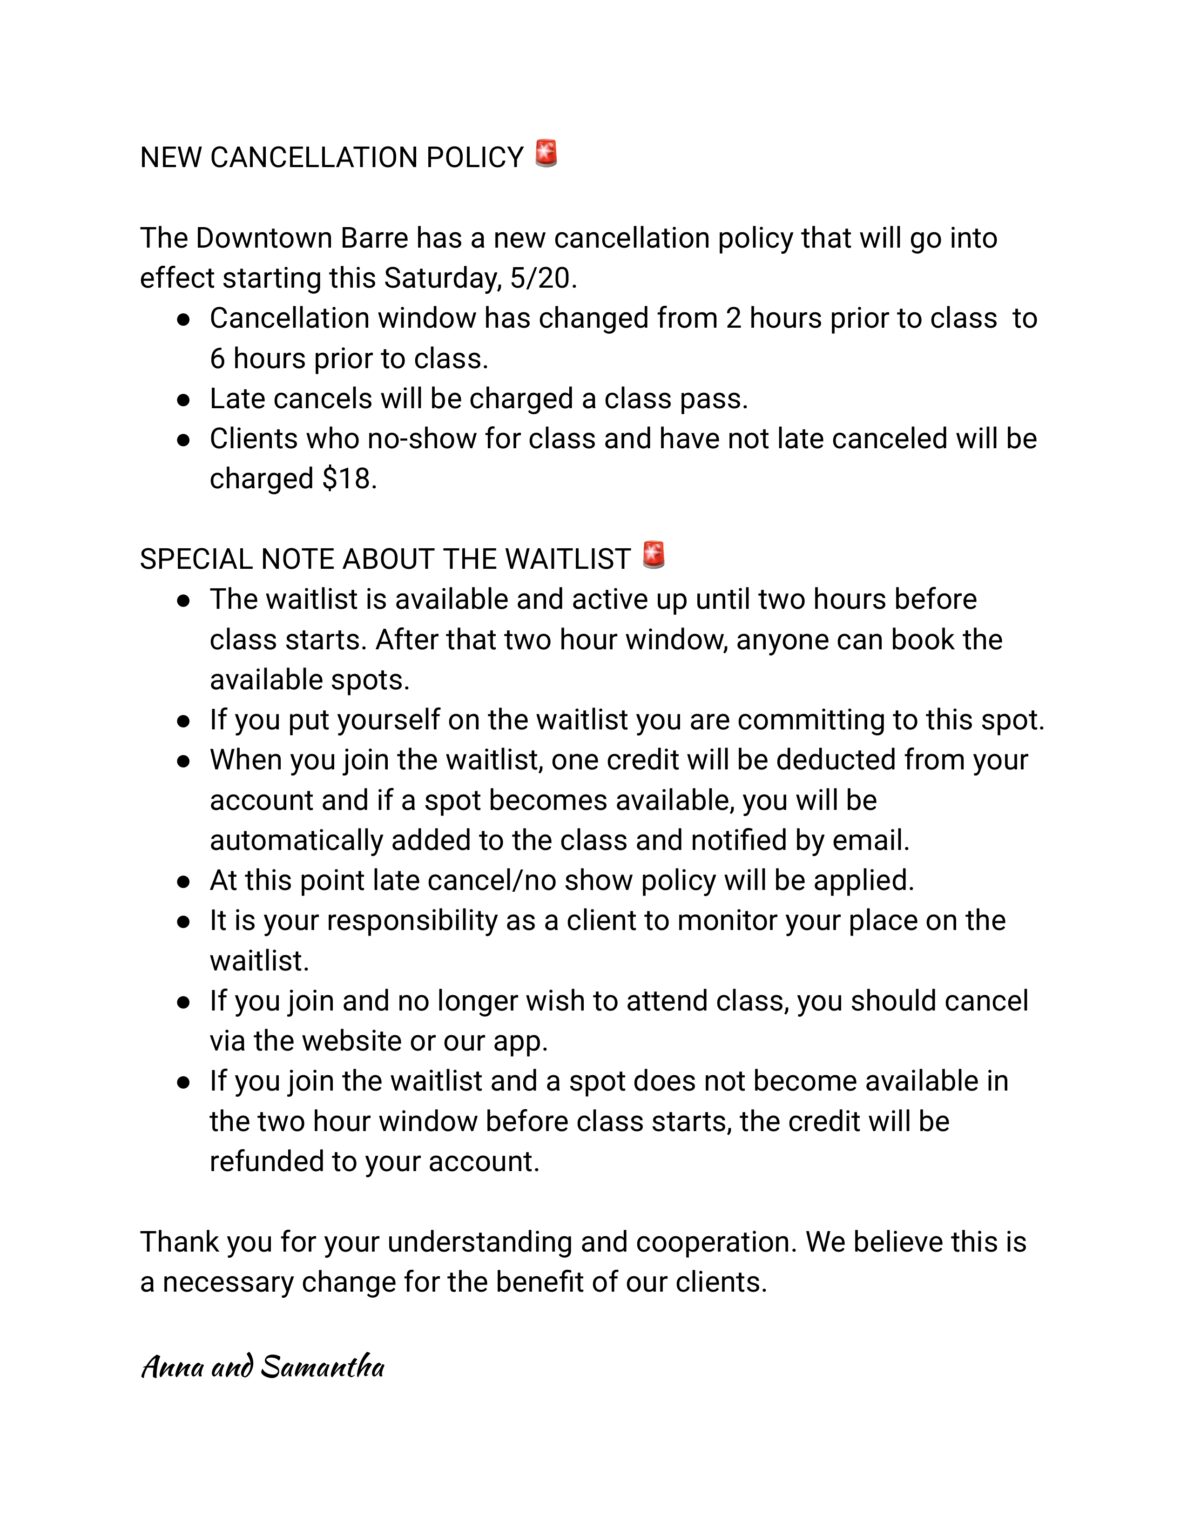 cancellation-policy-downtown-barre